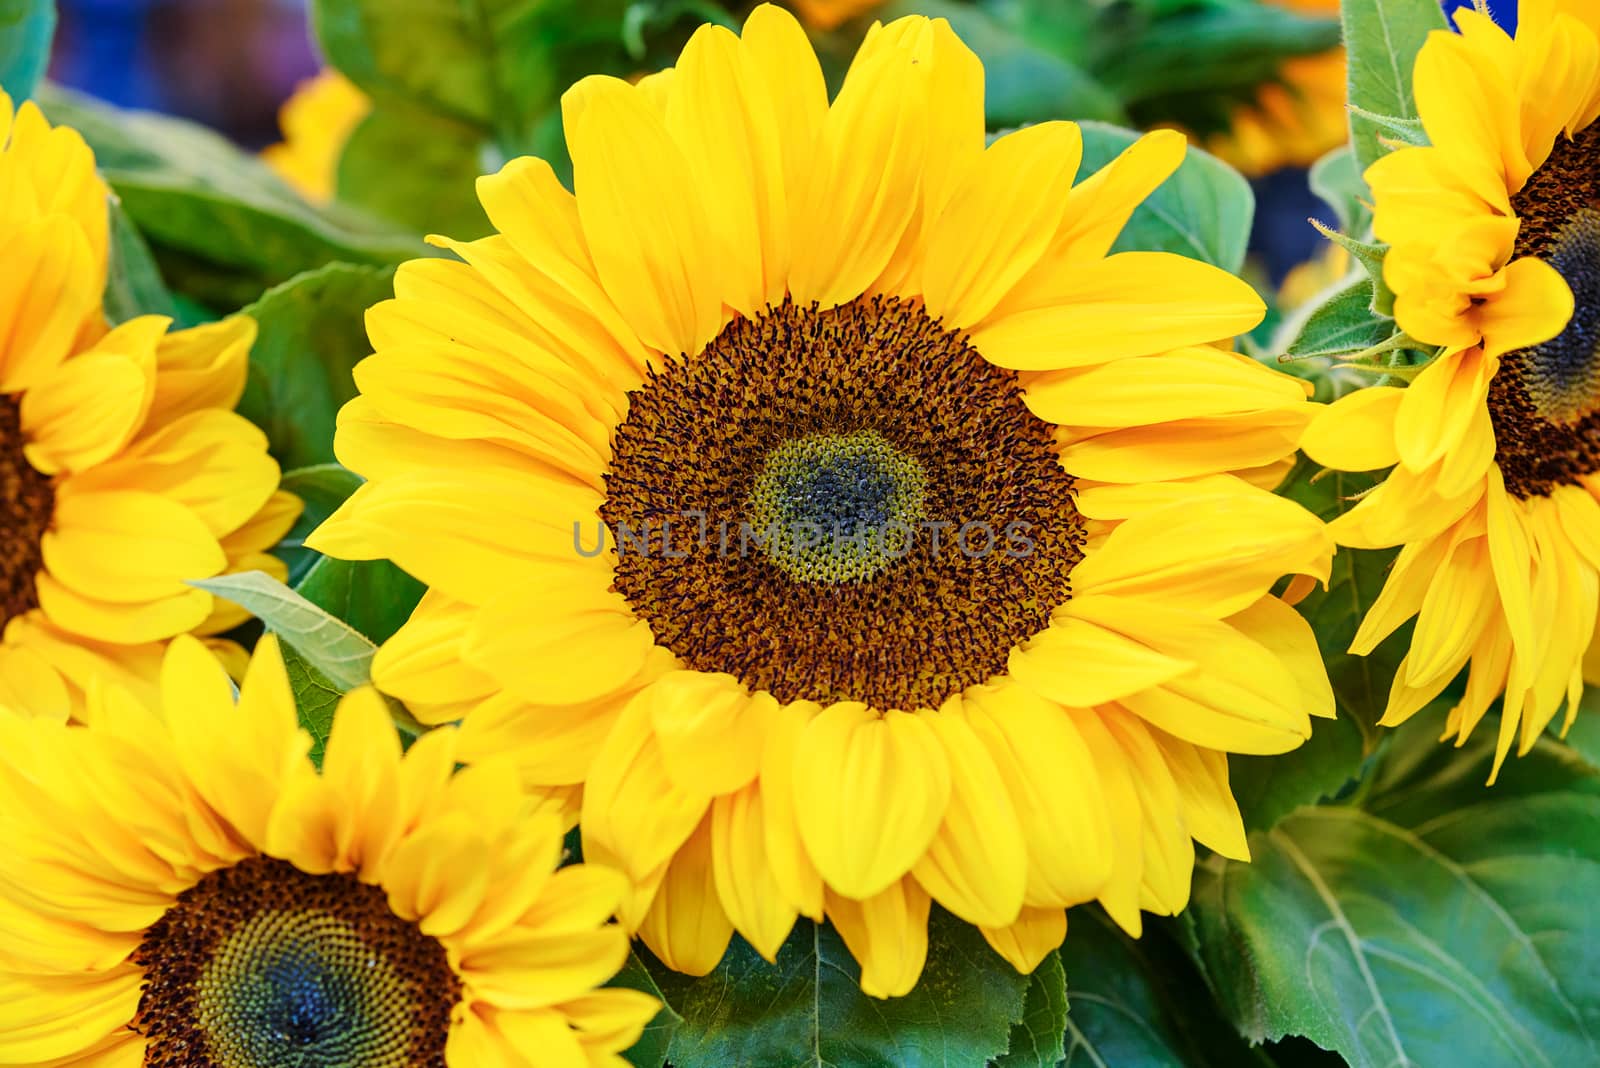 Beautiful bouquet of blooming sunflowers in close-up.